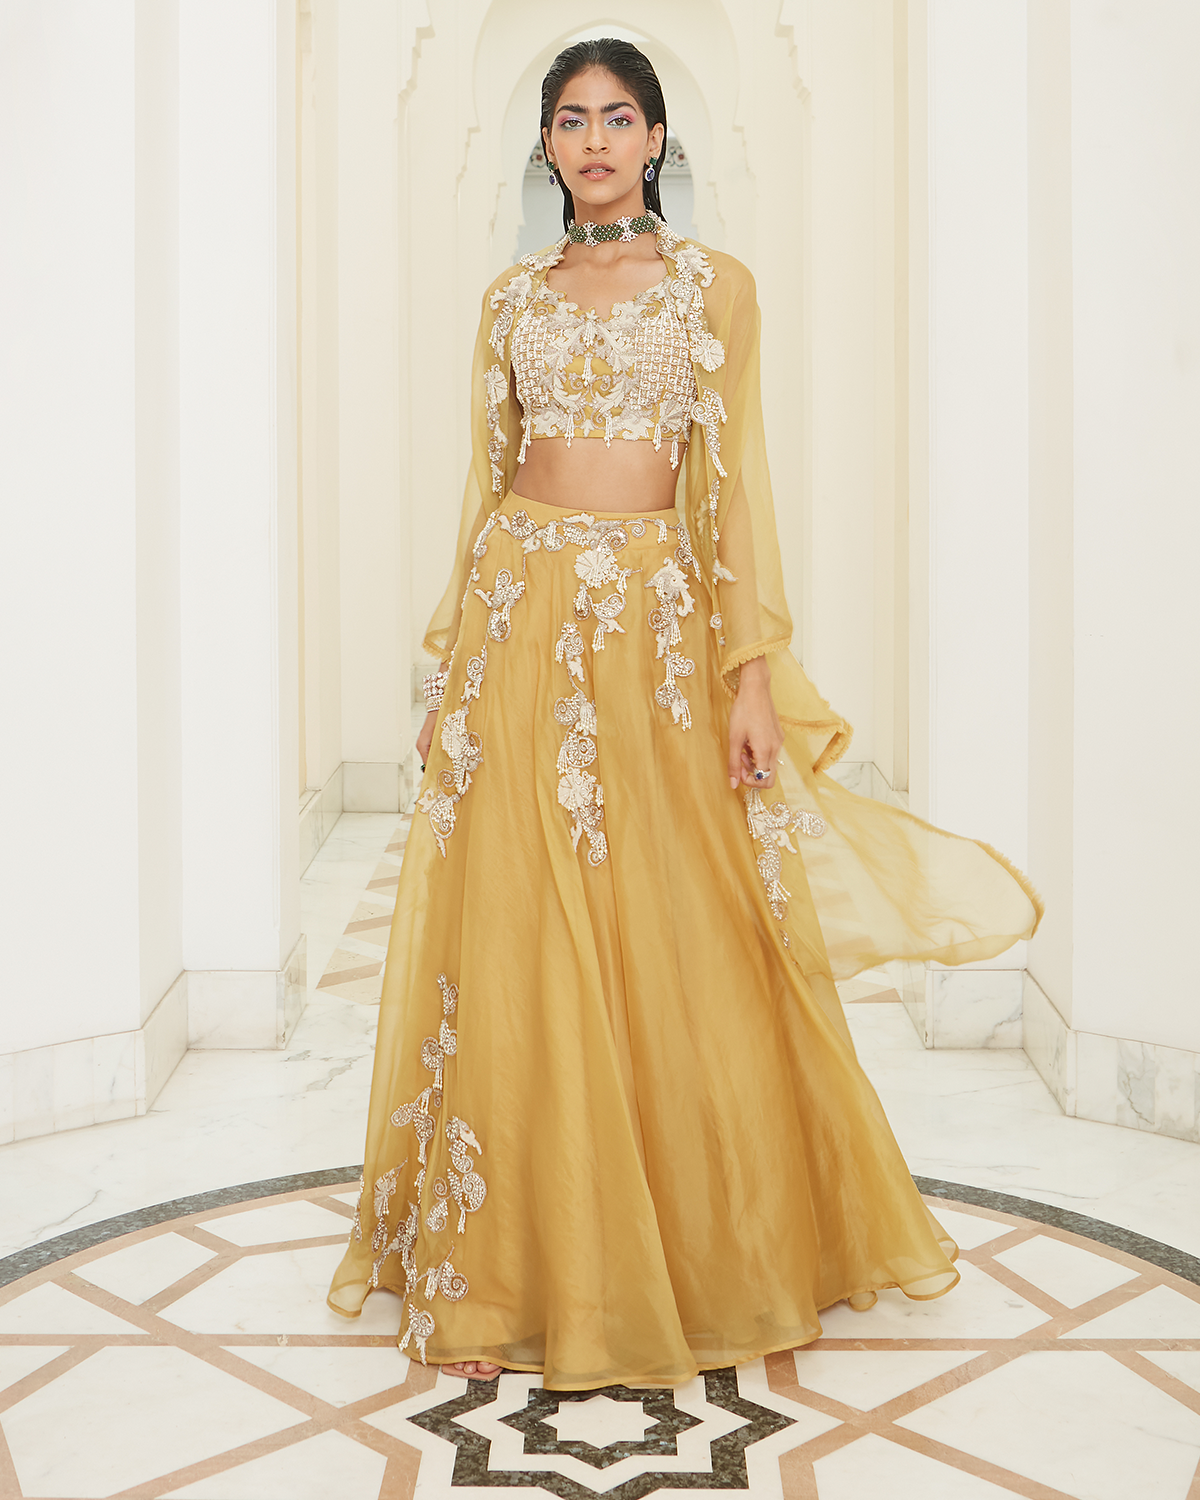 Sunrise Yellow Placement Embroidered Skirt Set by Ridhima Bhasin at KYNAH